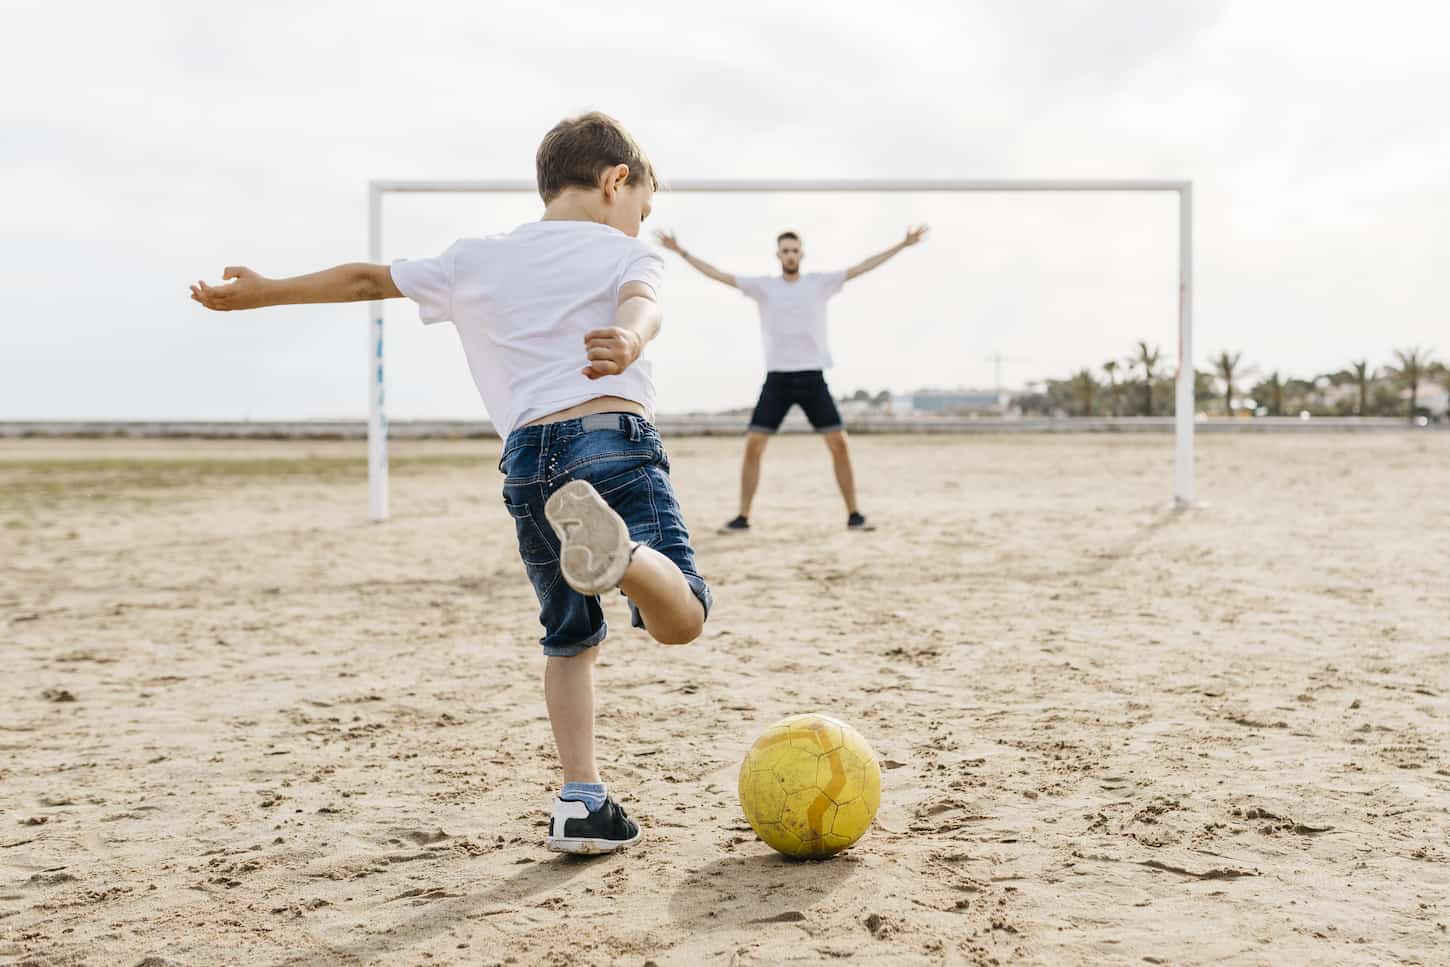 An image of a Man and a boy playing soccer on the beach.